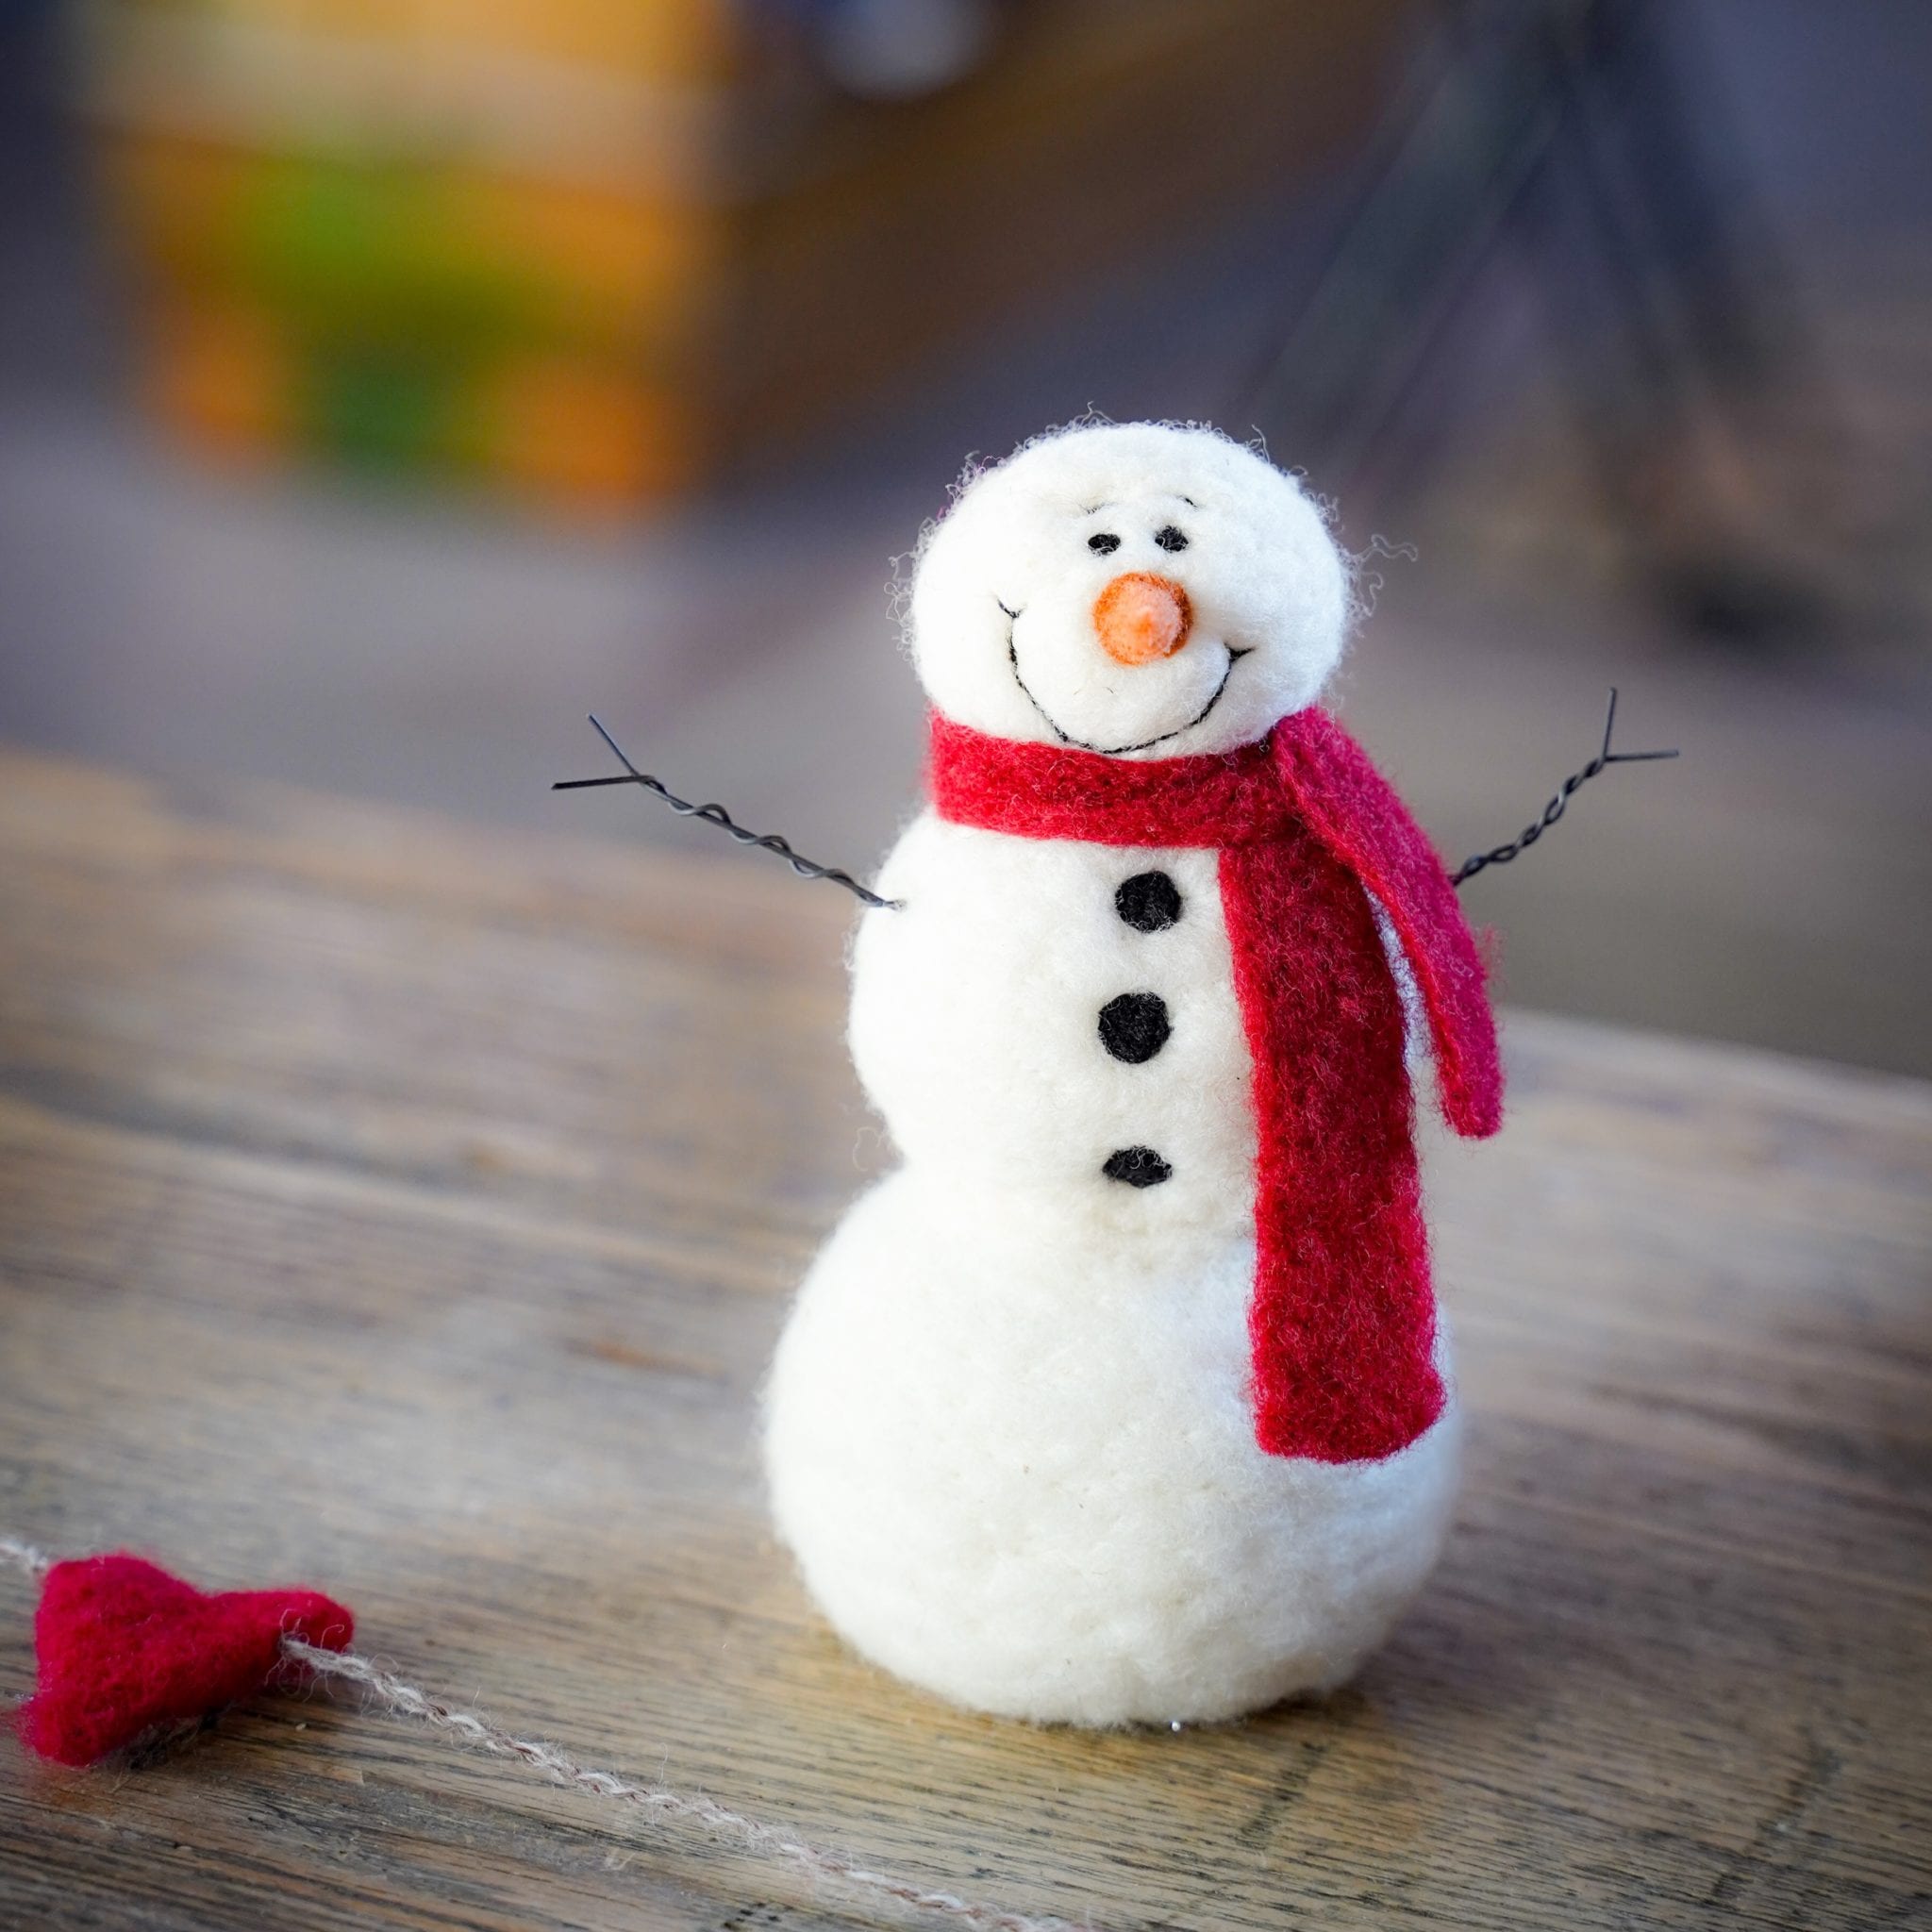 Needle Felting Is The Perfect Low-Cost Winter Craft! - Hobby Farms